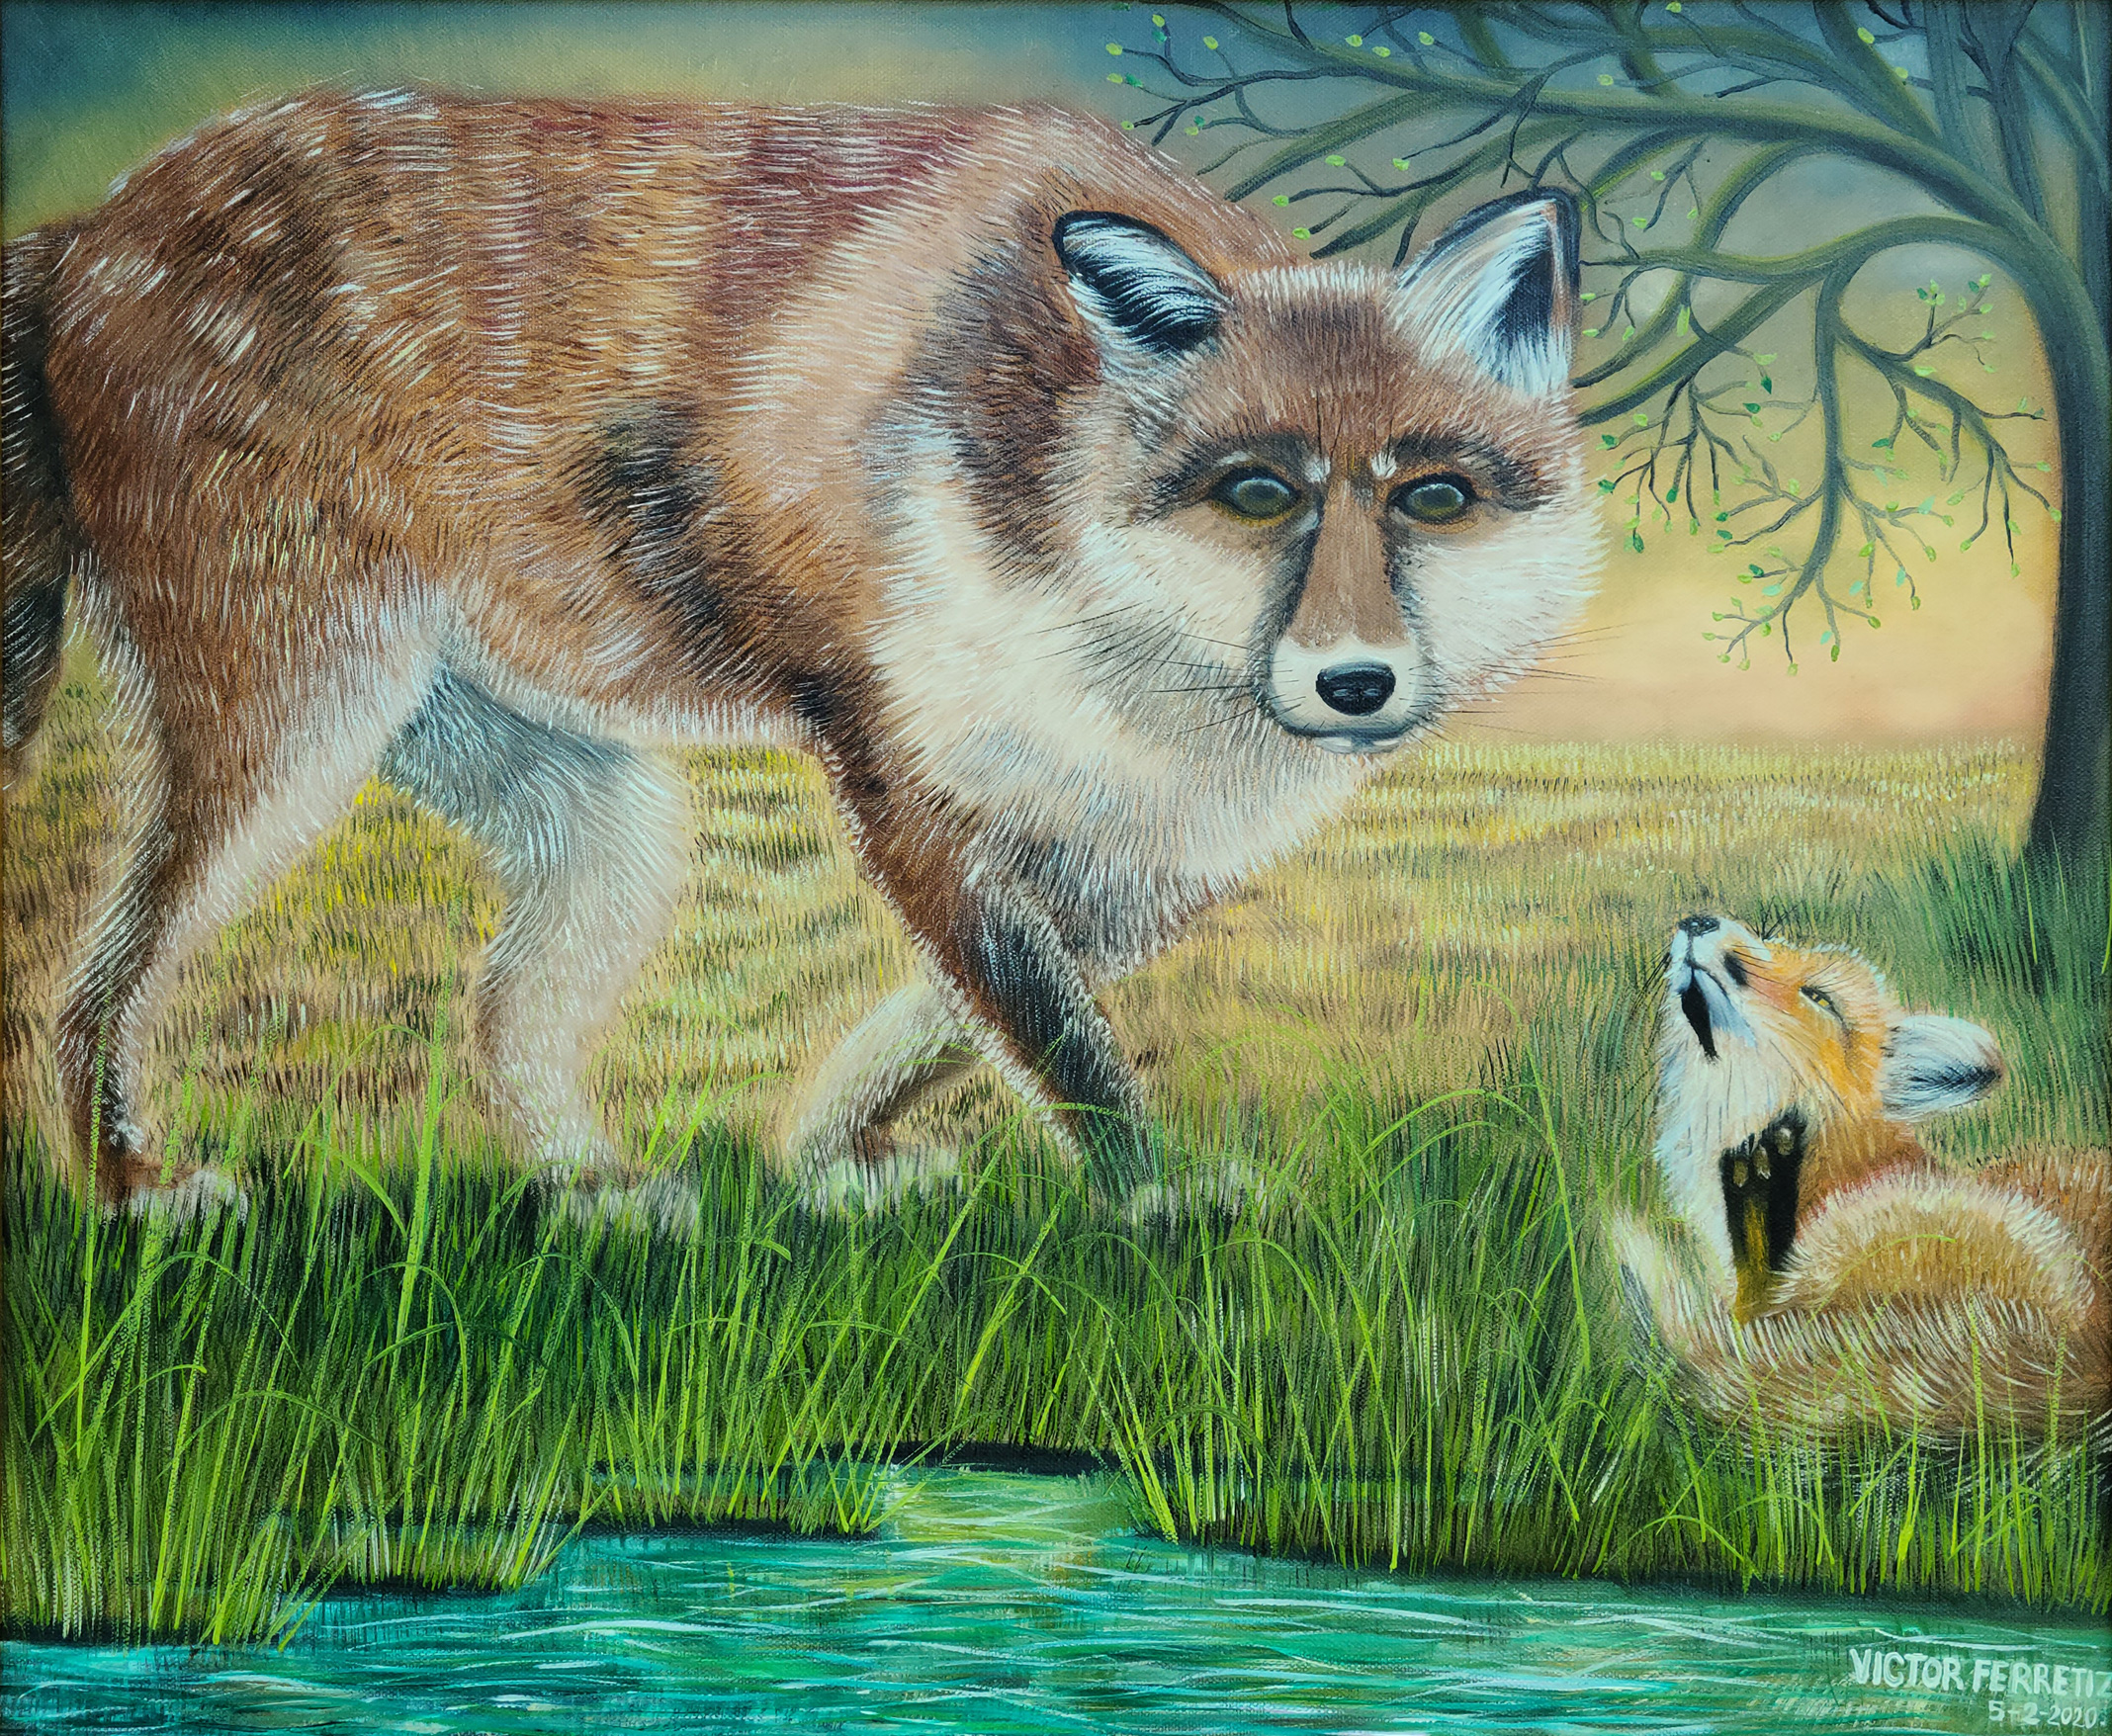 This original work of art represents the greatness of wildlife and parents' care in caring for our children. The ability to hunt prey is essential for puppies to achieve their dreams in life to survive.